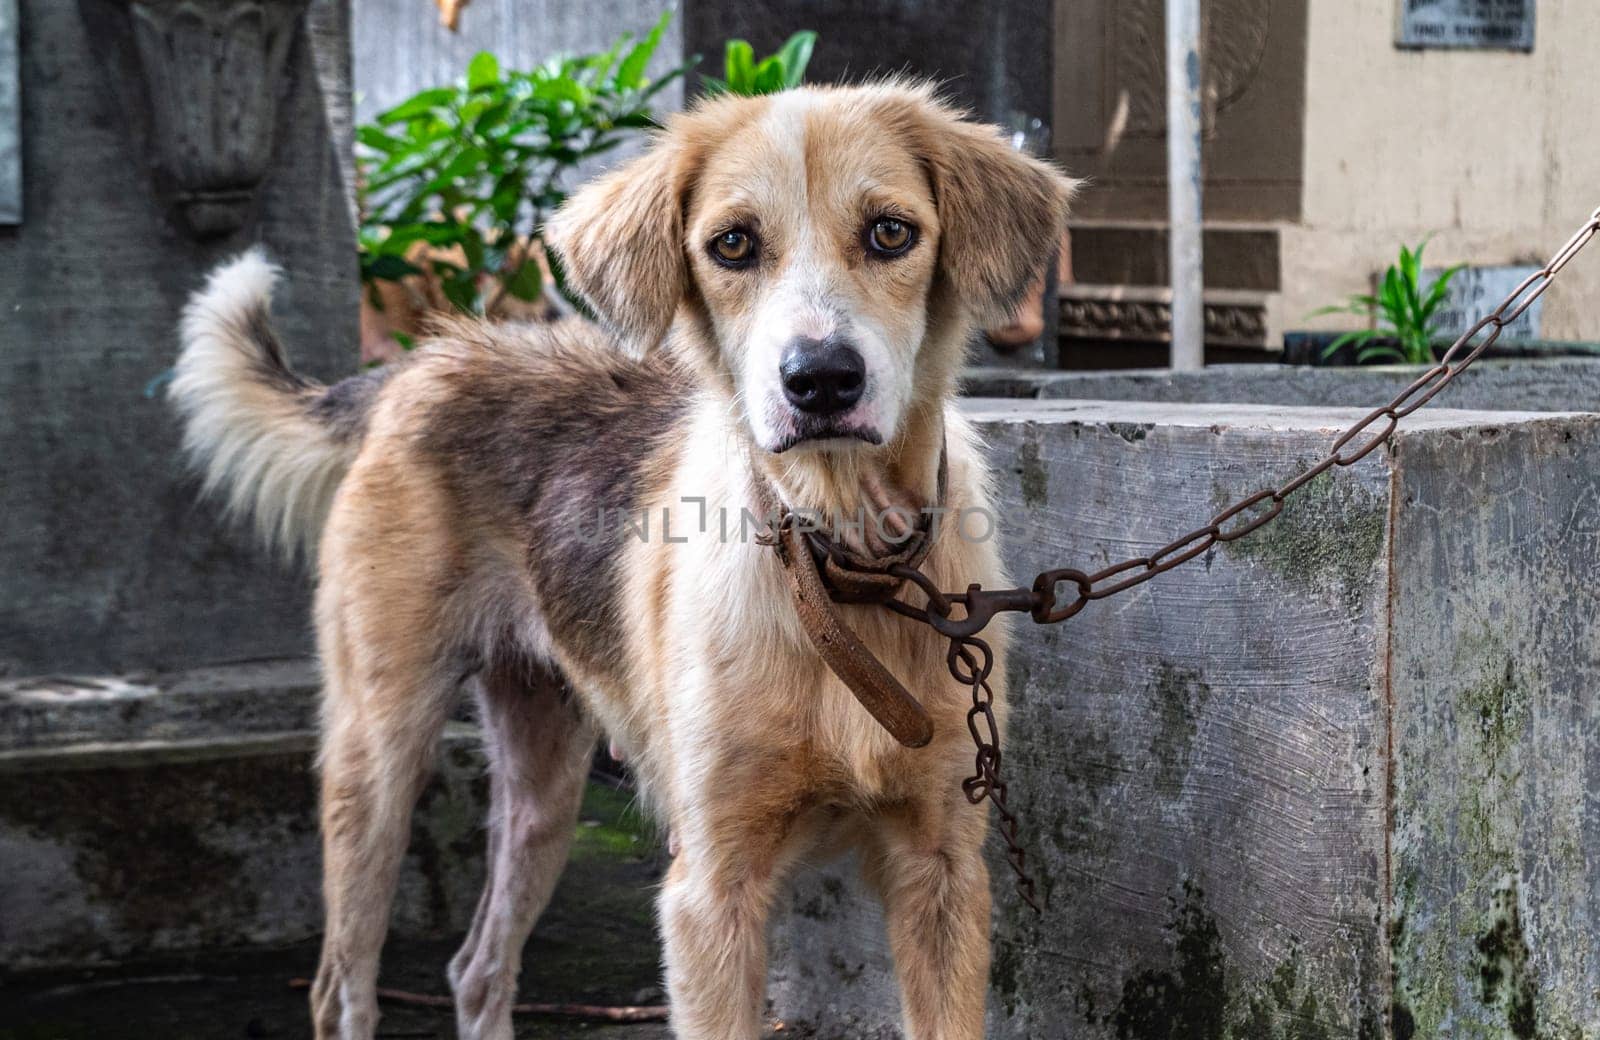 Scruffy dog on a chain in a rustic outdoor setting during daytime by Busker